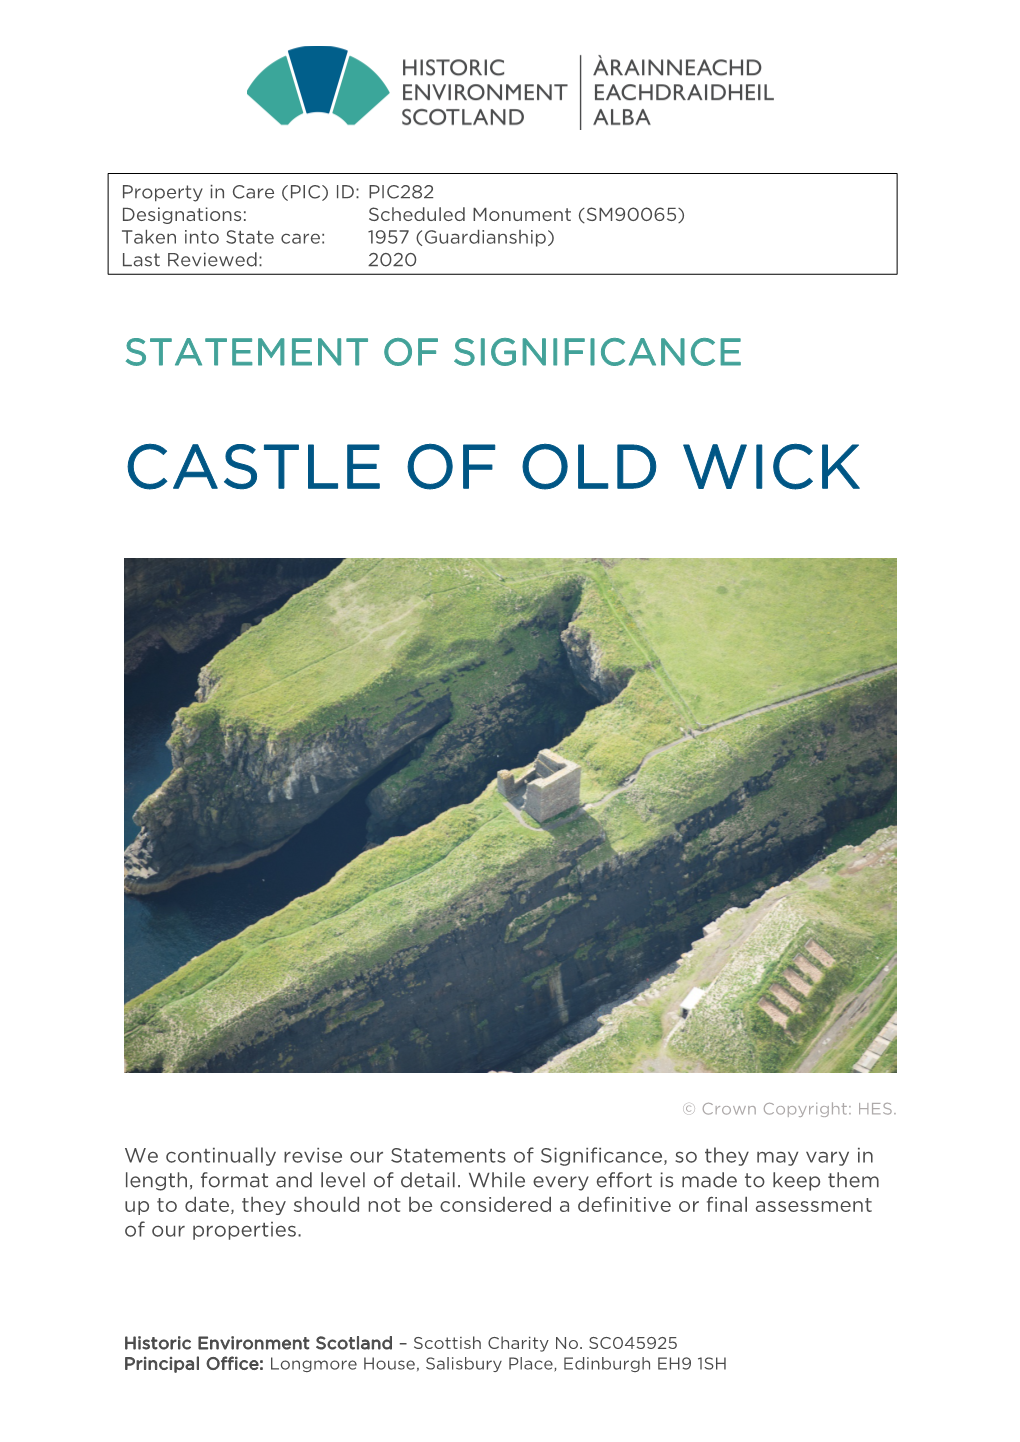 Castle of Old Wick Statement of Significance